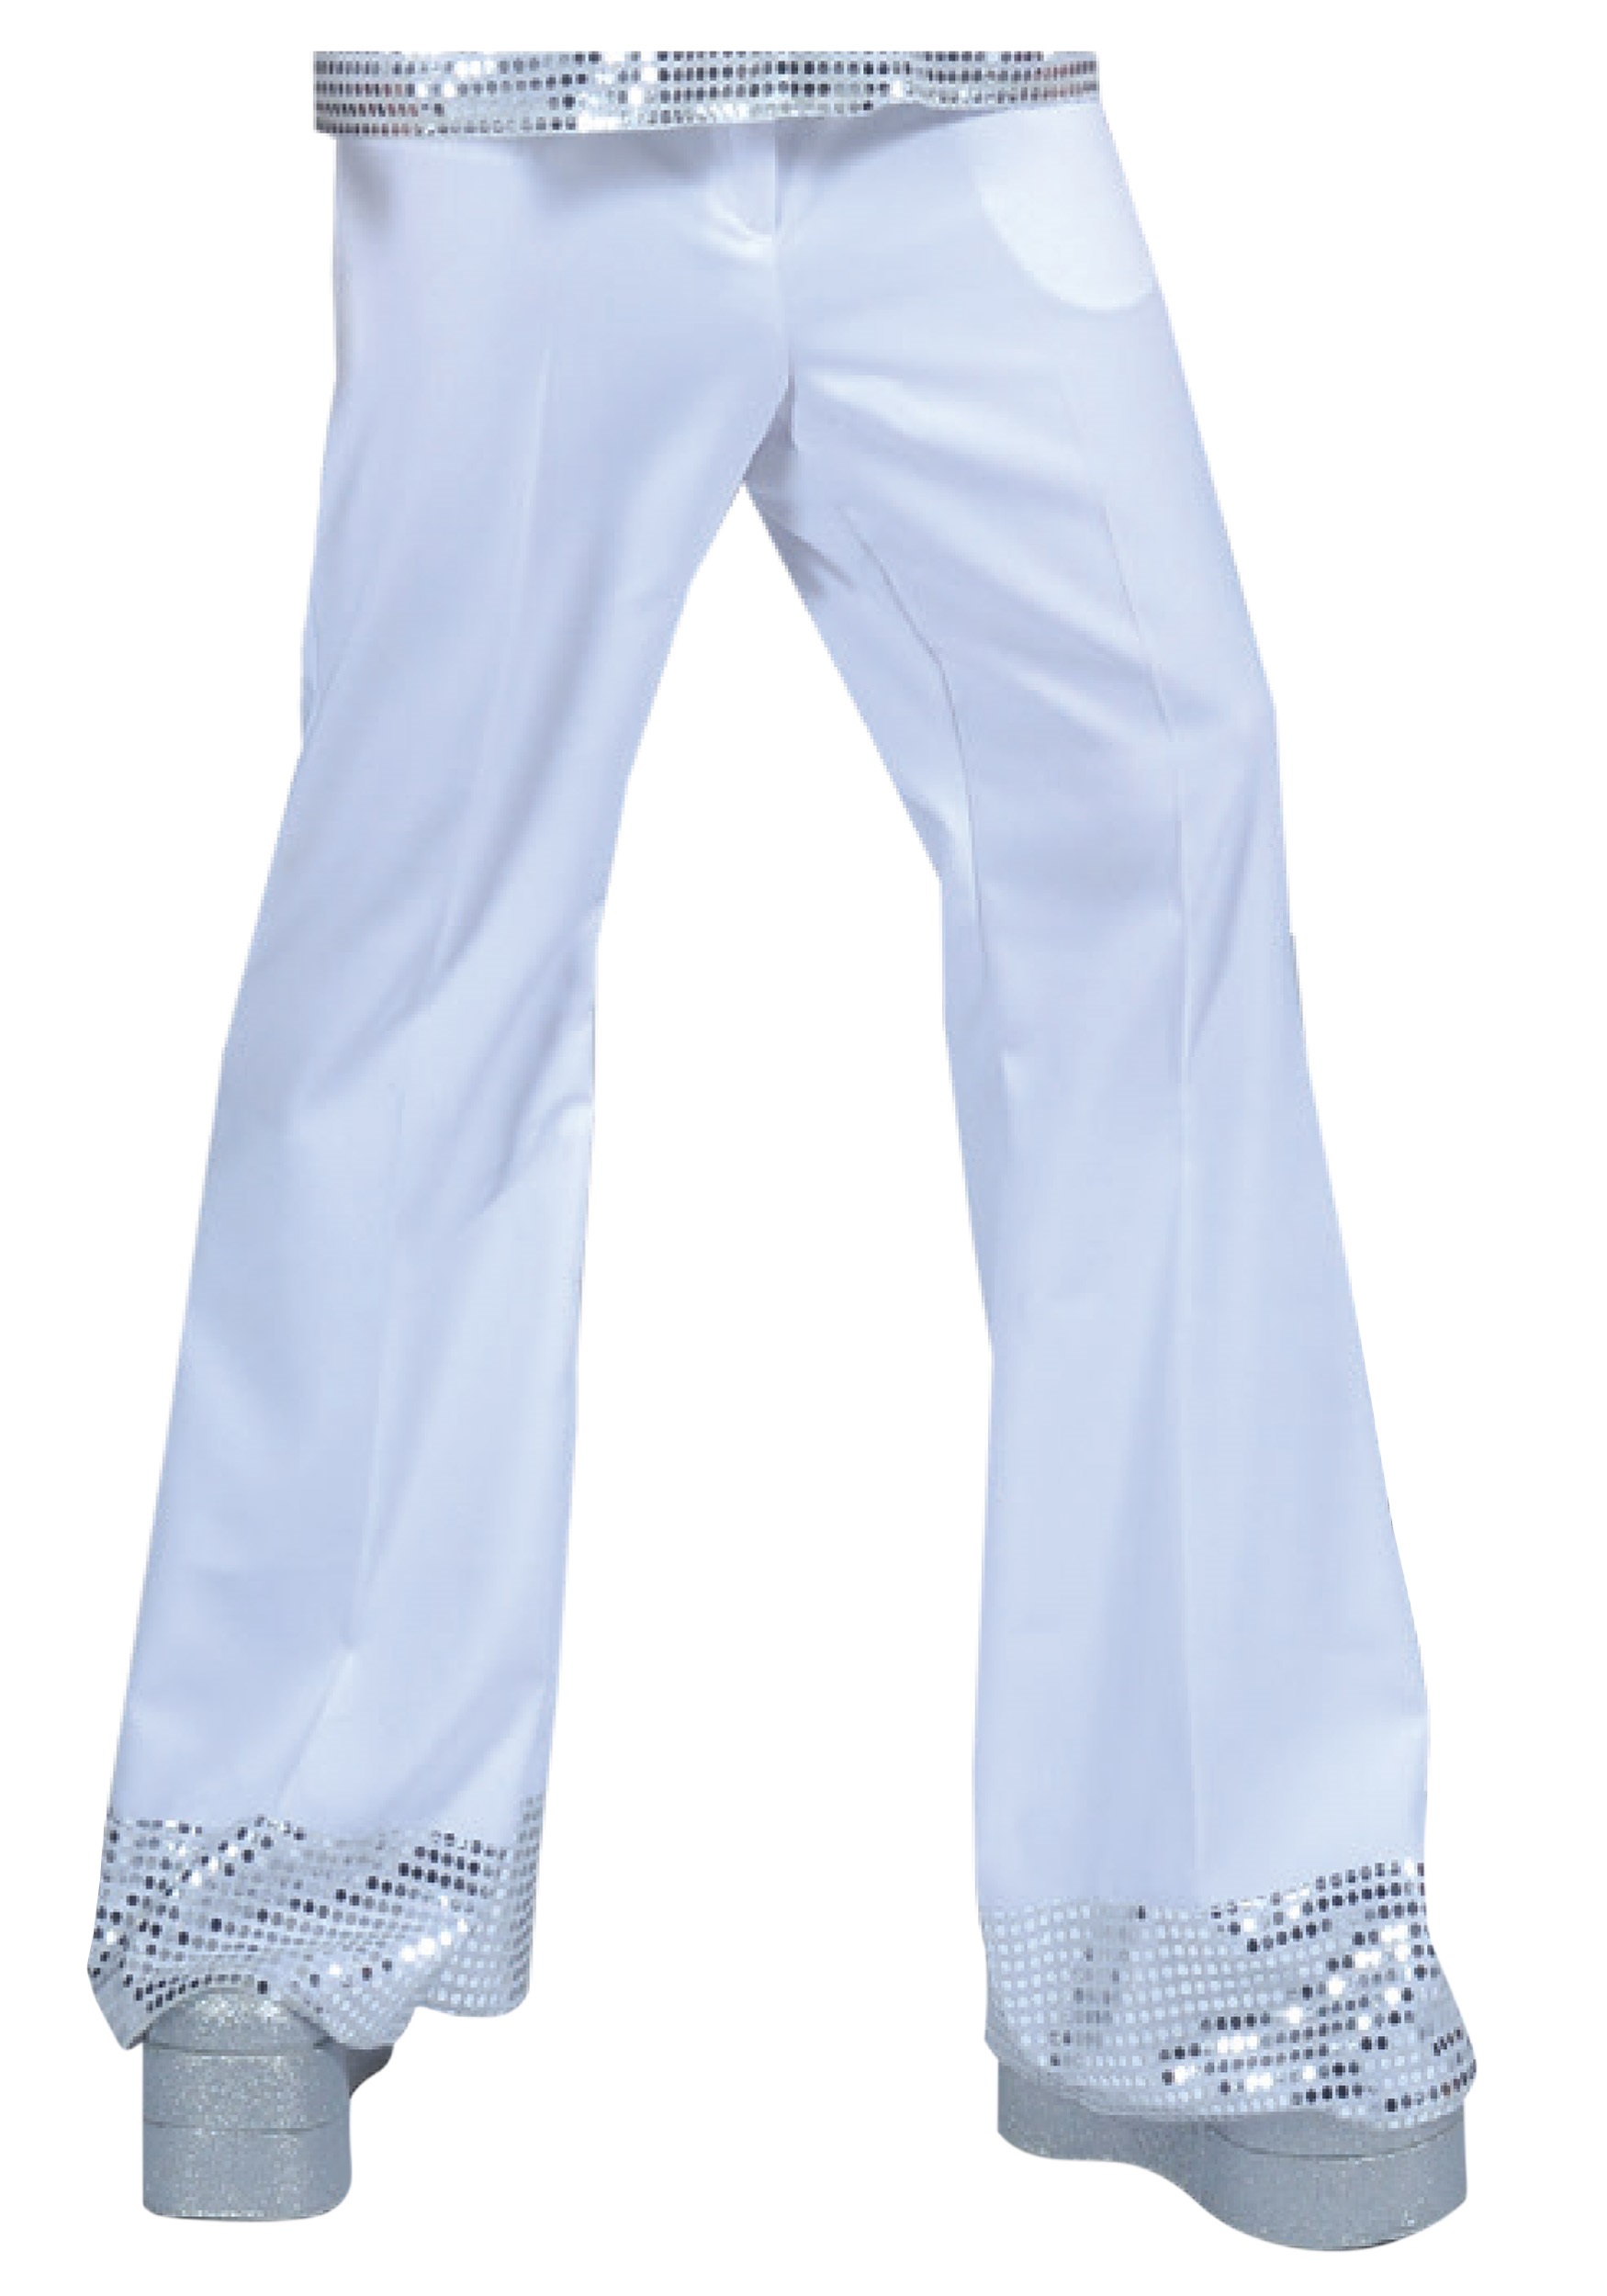 https://images.halloween.com/products/5581/1-1/white-sequin-cuff-disco-pants.jpg